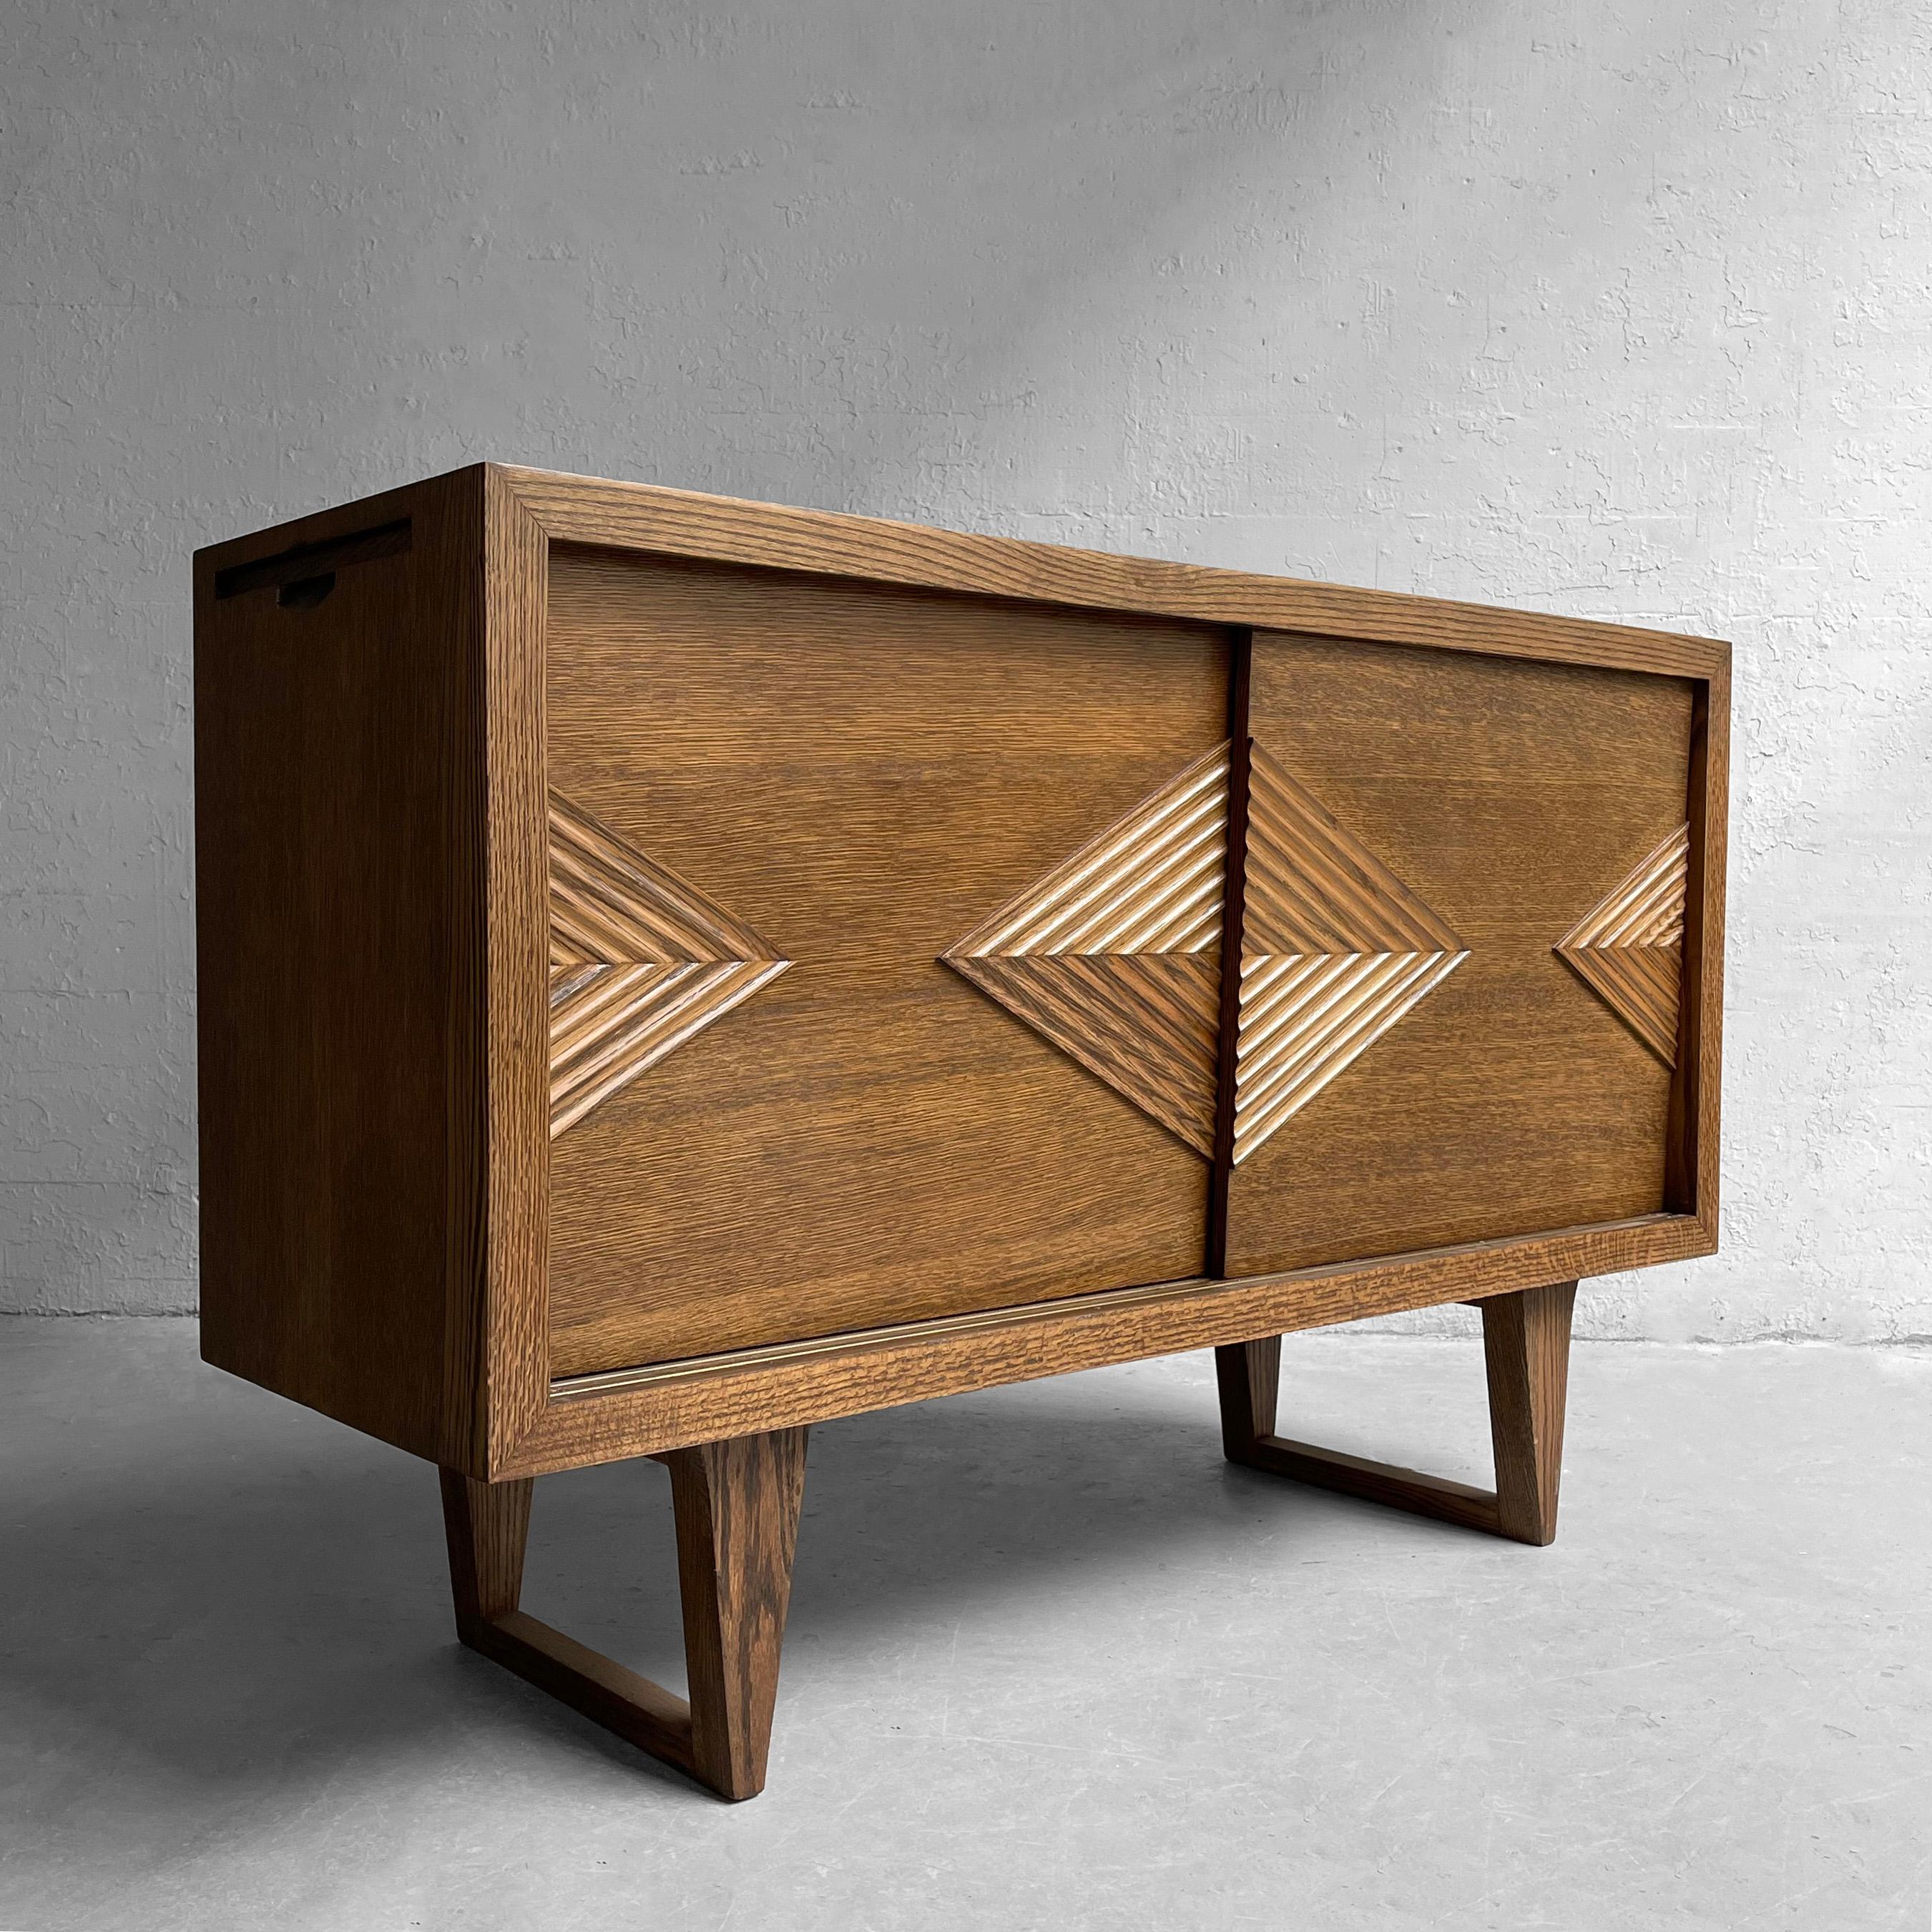 Mid-Century Modern, oak sideboard, credenza features superb design and craftsmanship with decoratively carved, diamond shape chevron doors that slide open to reveal multiple pull-out drawers and pull-out ledges on either side to extend the top